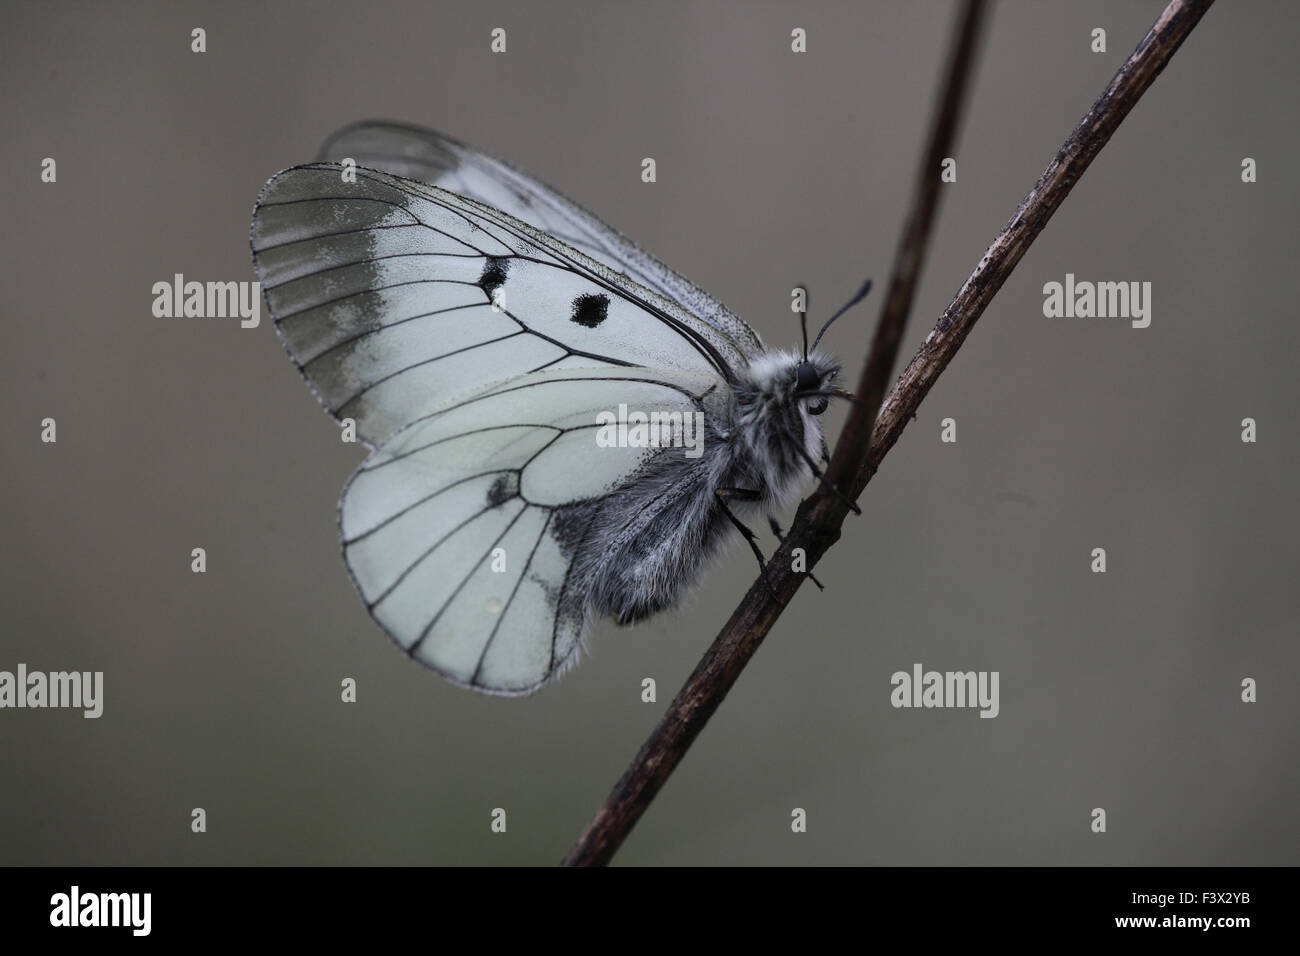 at rest side view with wings closed Hungary May 2015 Stock Photo